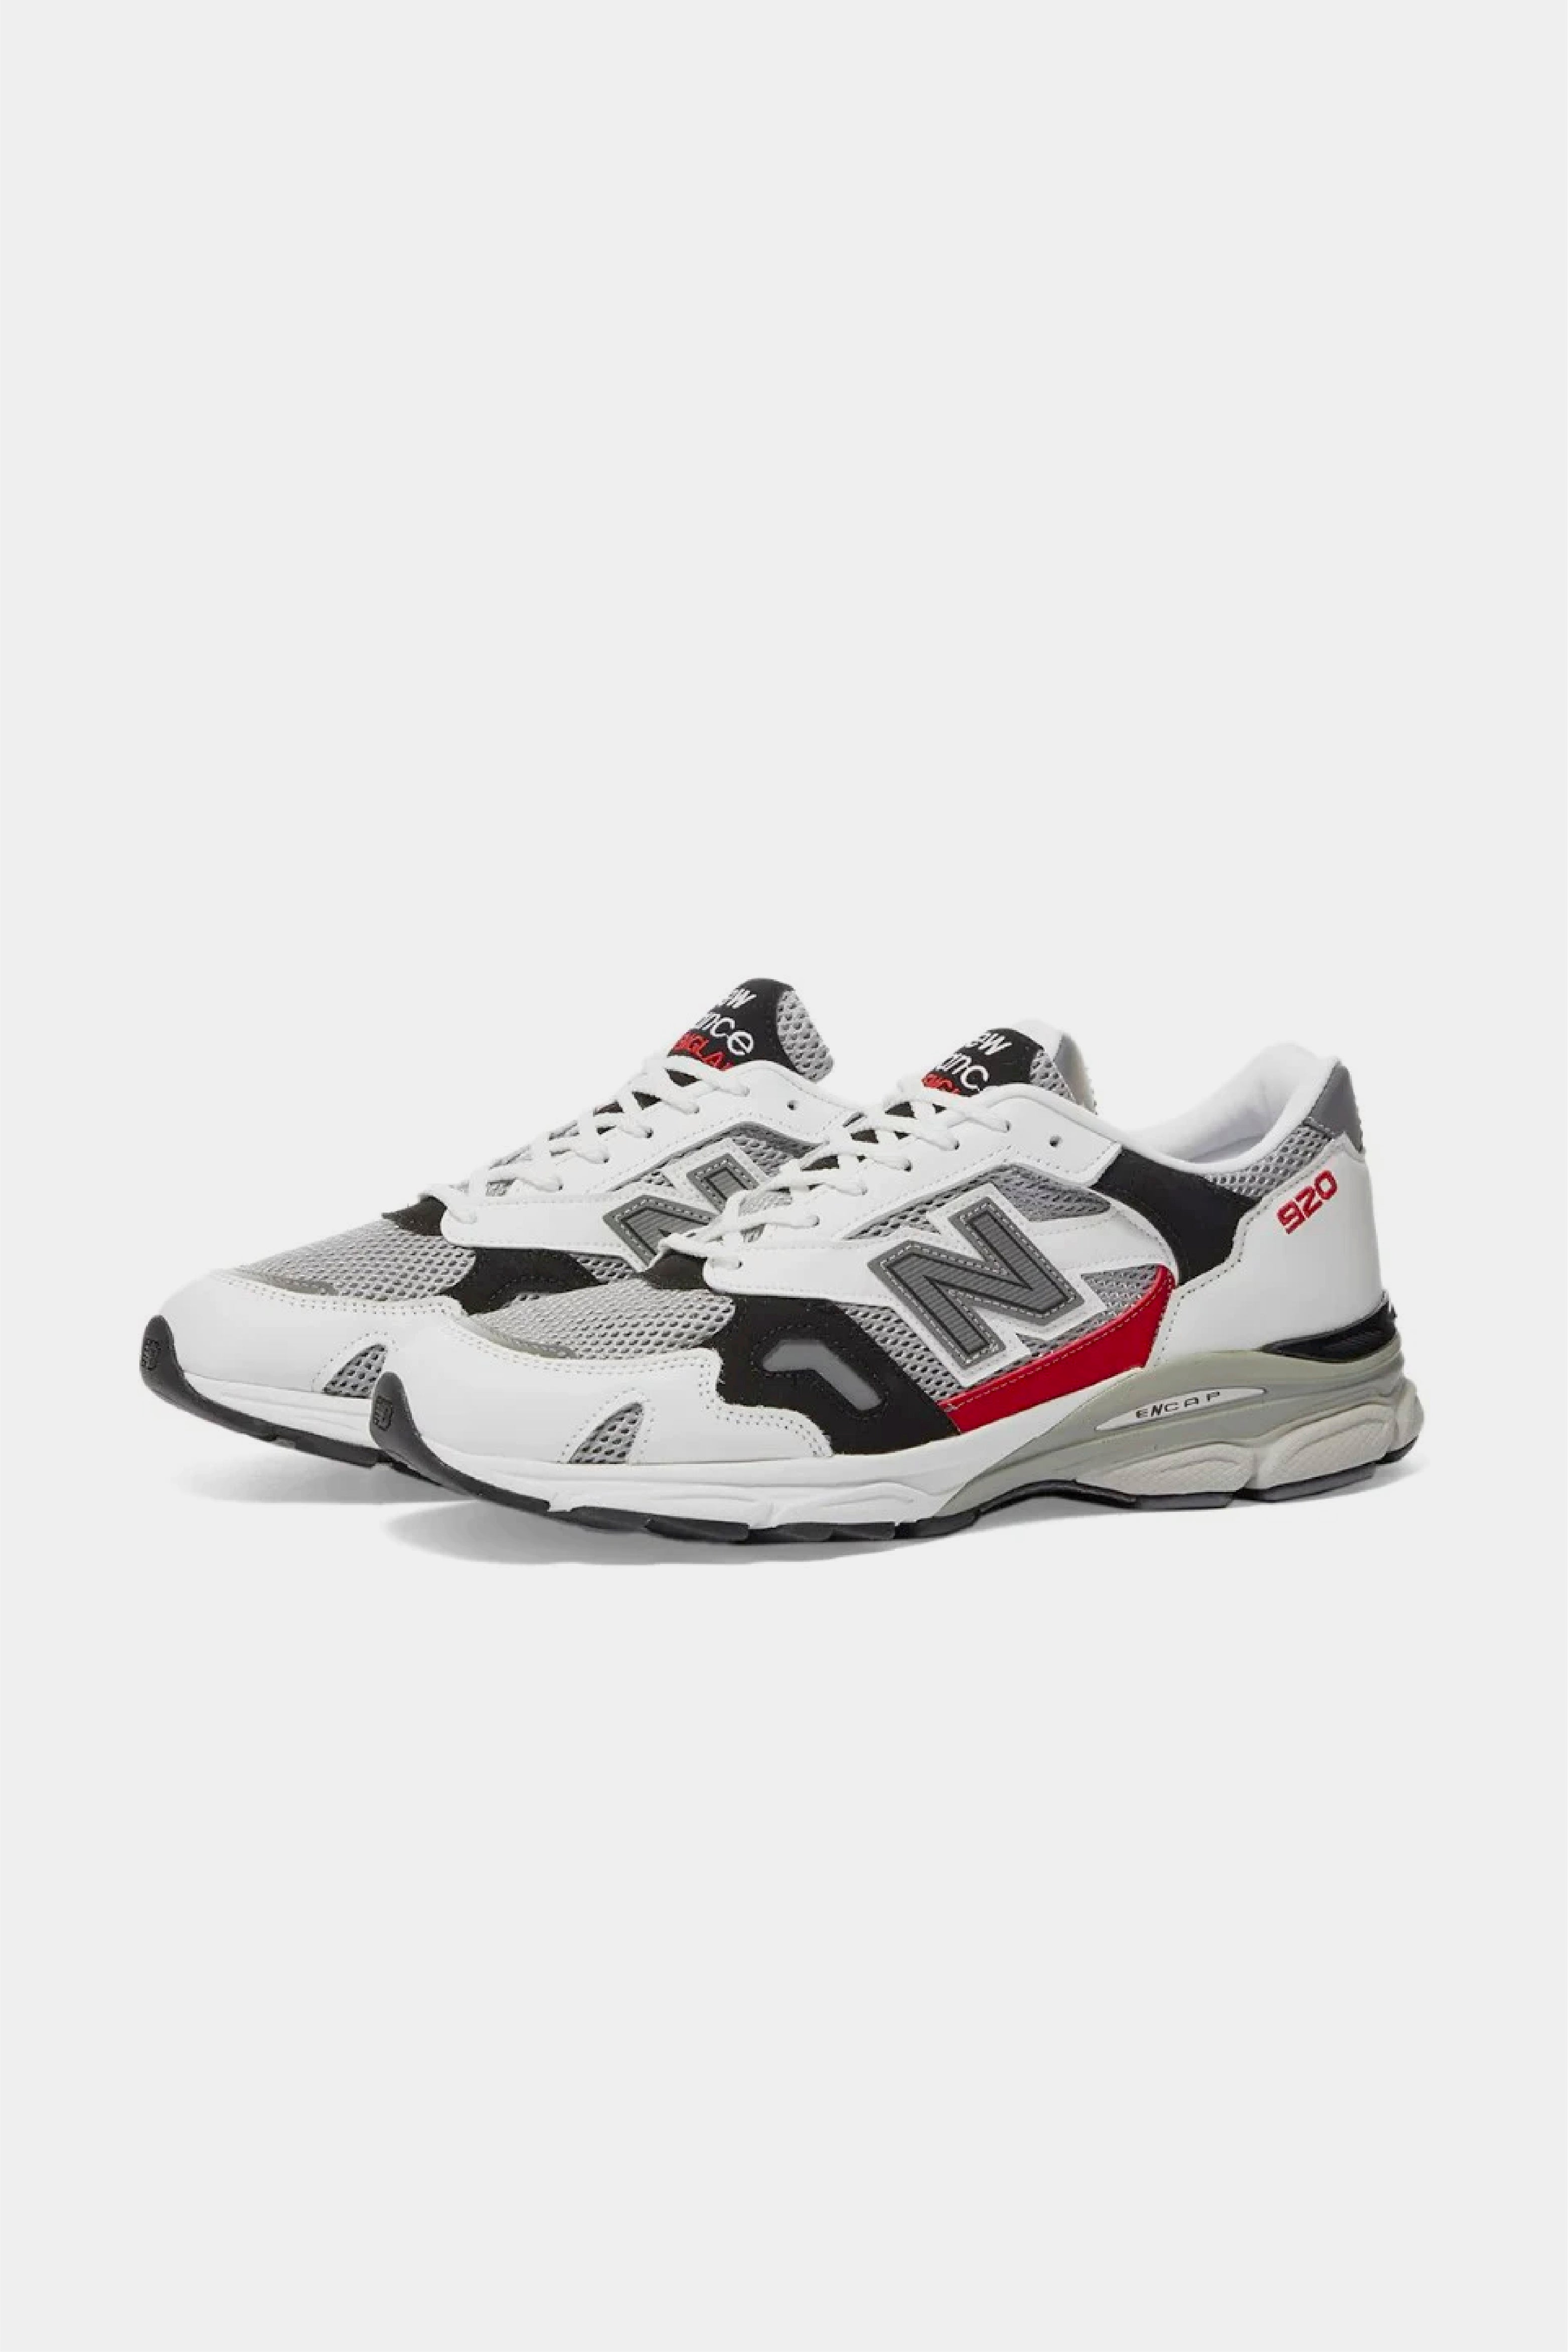 Selectshop FRAME - NEW BALANCE 920 Made In UK "White Grey Red" Footwear Concept Store Dubai